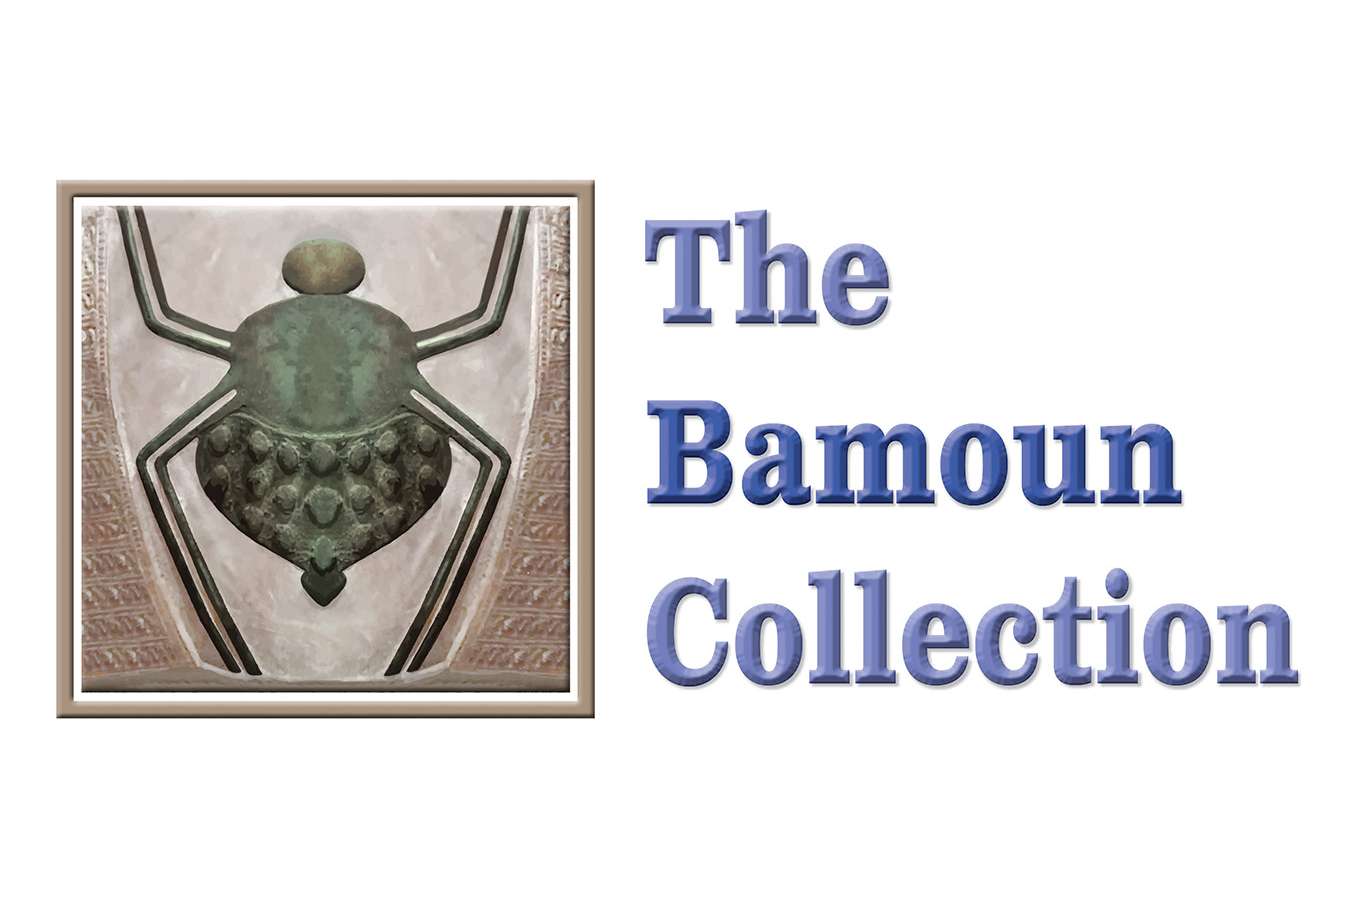 logo 4 : Bamoun Collection is a small private museum showcasing the royal art of Camaroon